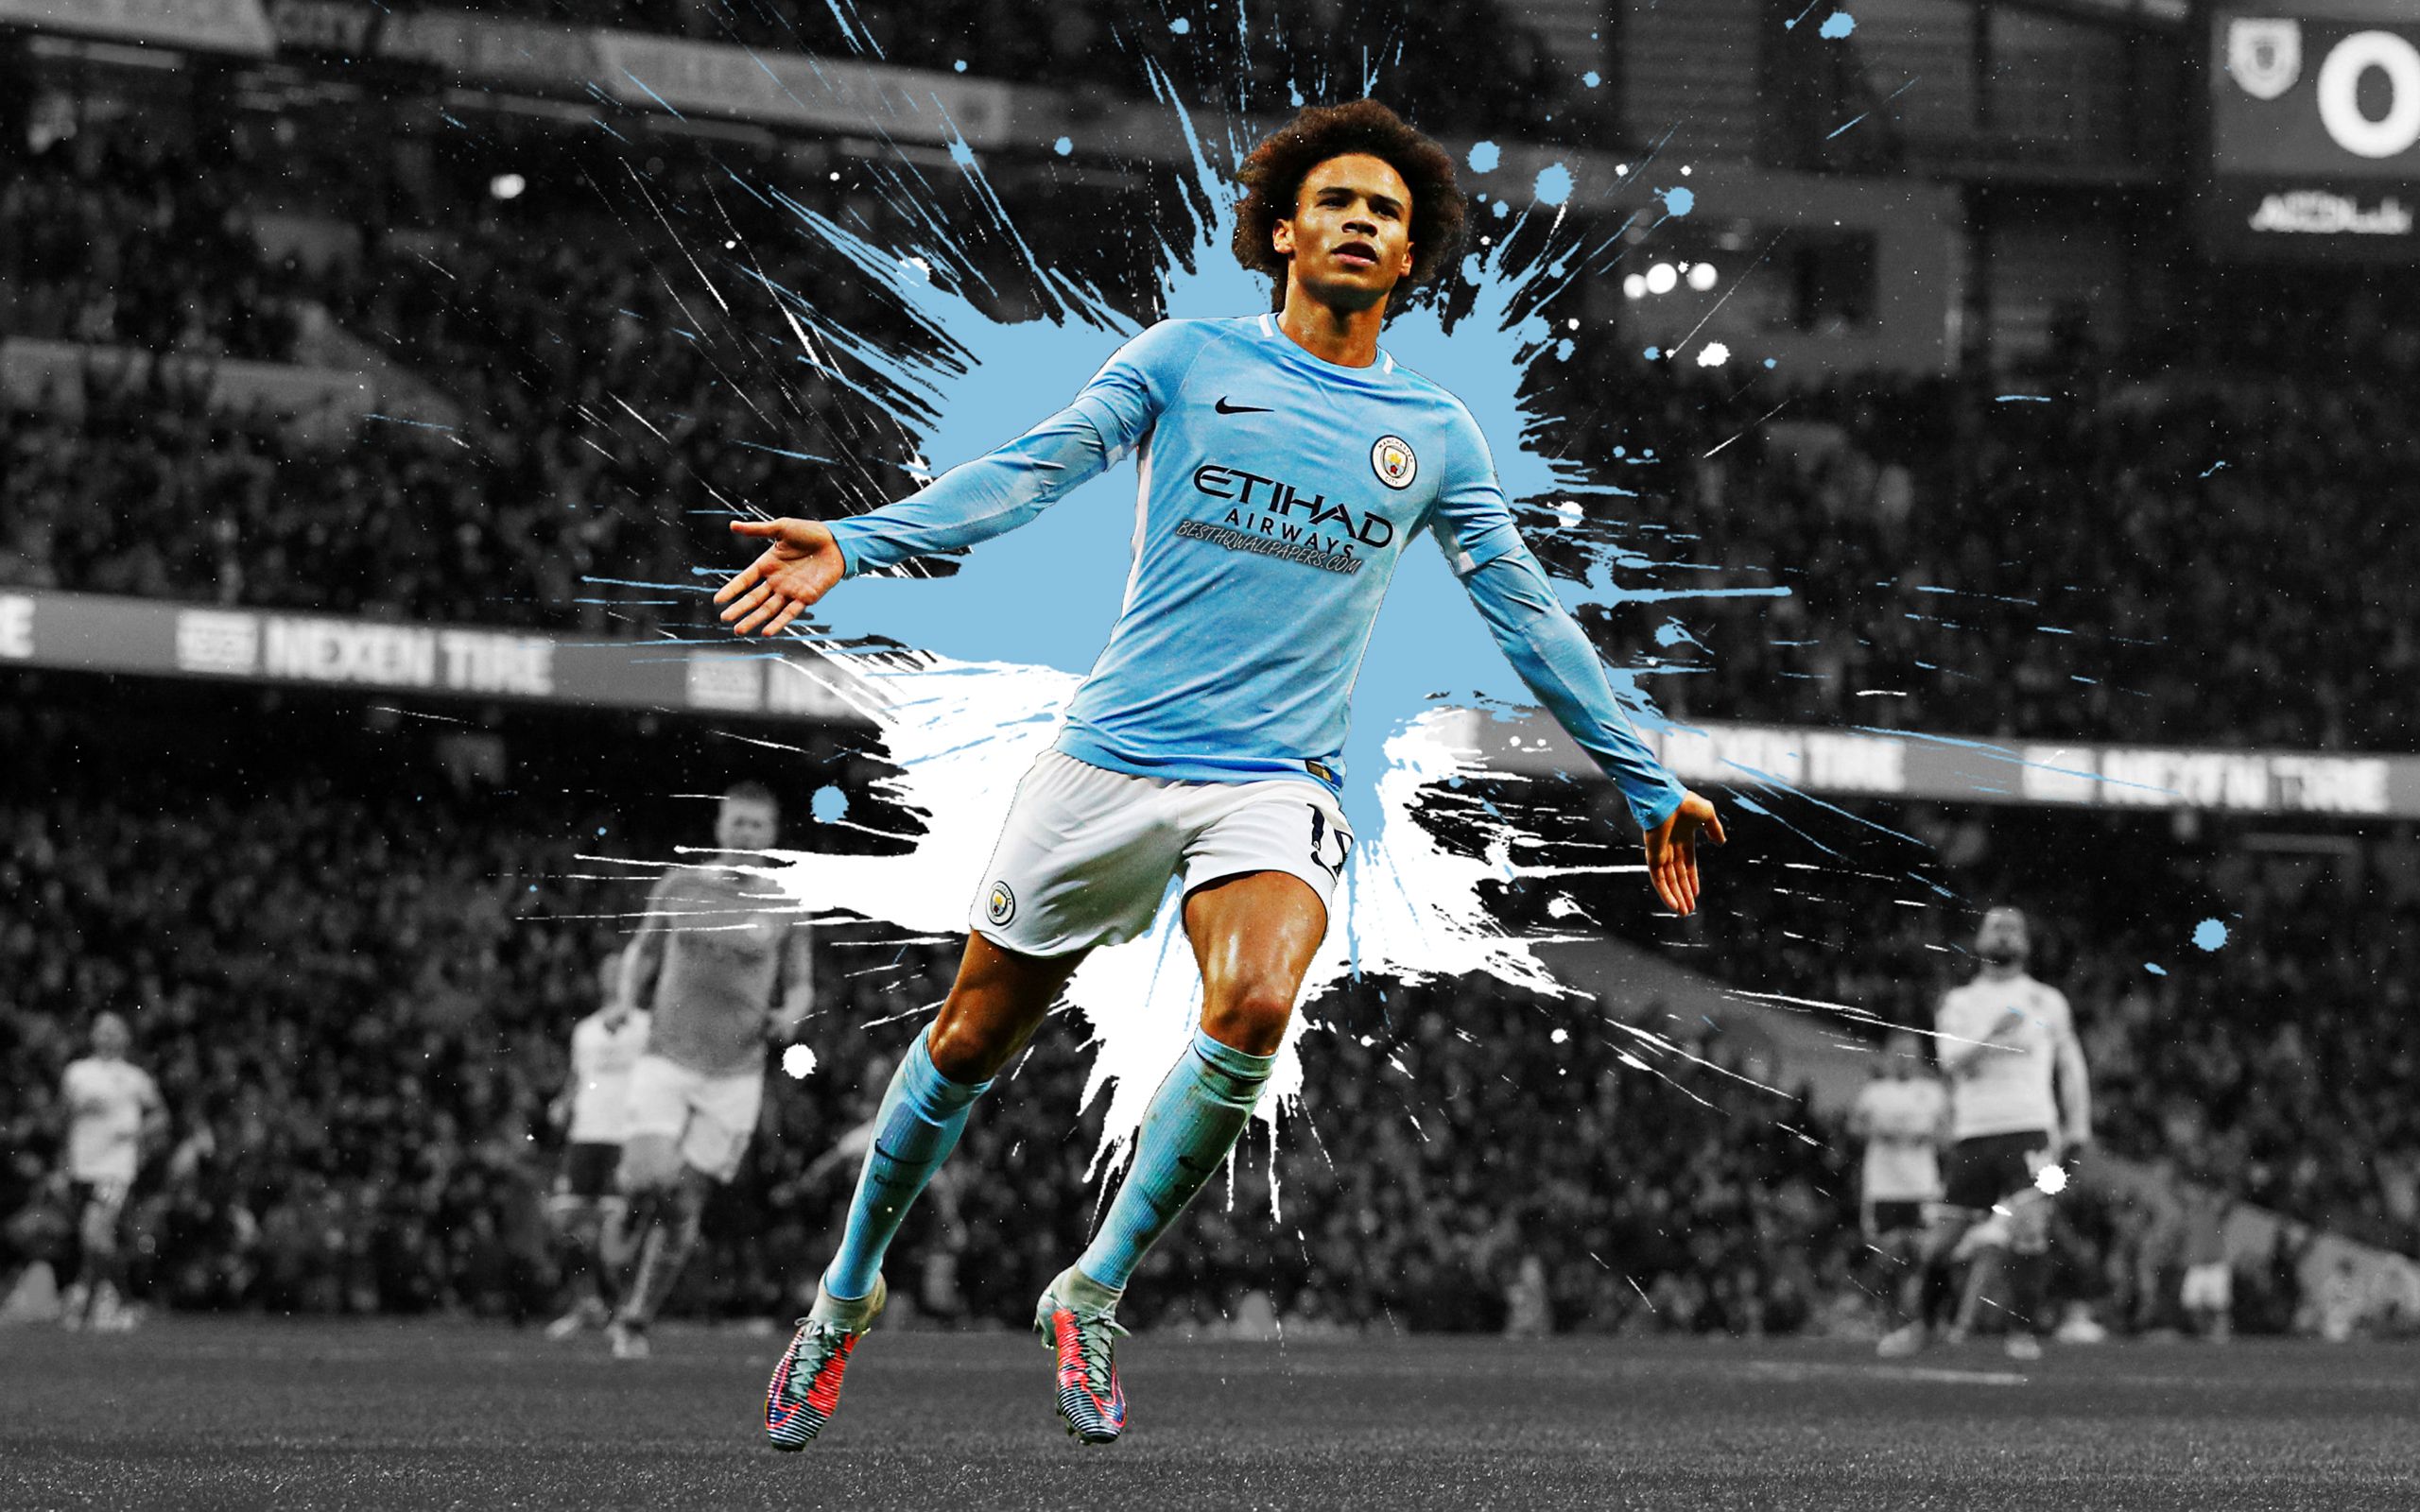 Free download Leroy San HD Wallpaper Background Image 2560x1600 ID980862 [2560x1600] for your Desktop, Mobile & Tablet. Explore Leroy Sané Wallpaper. Leroy Sané Wallpaper